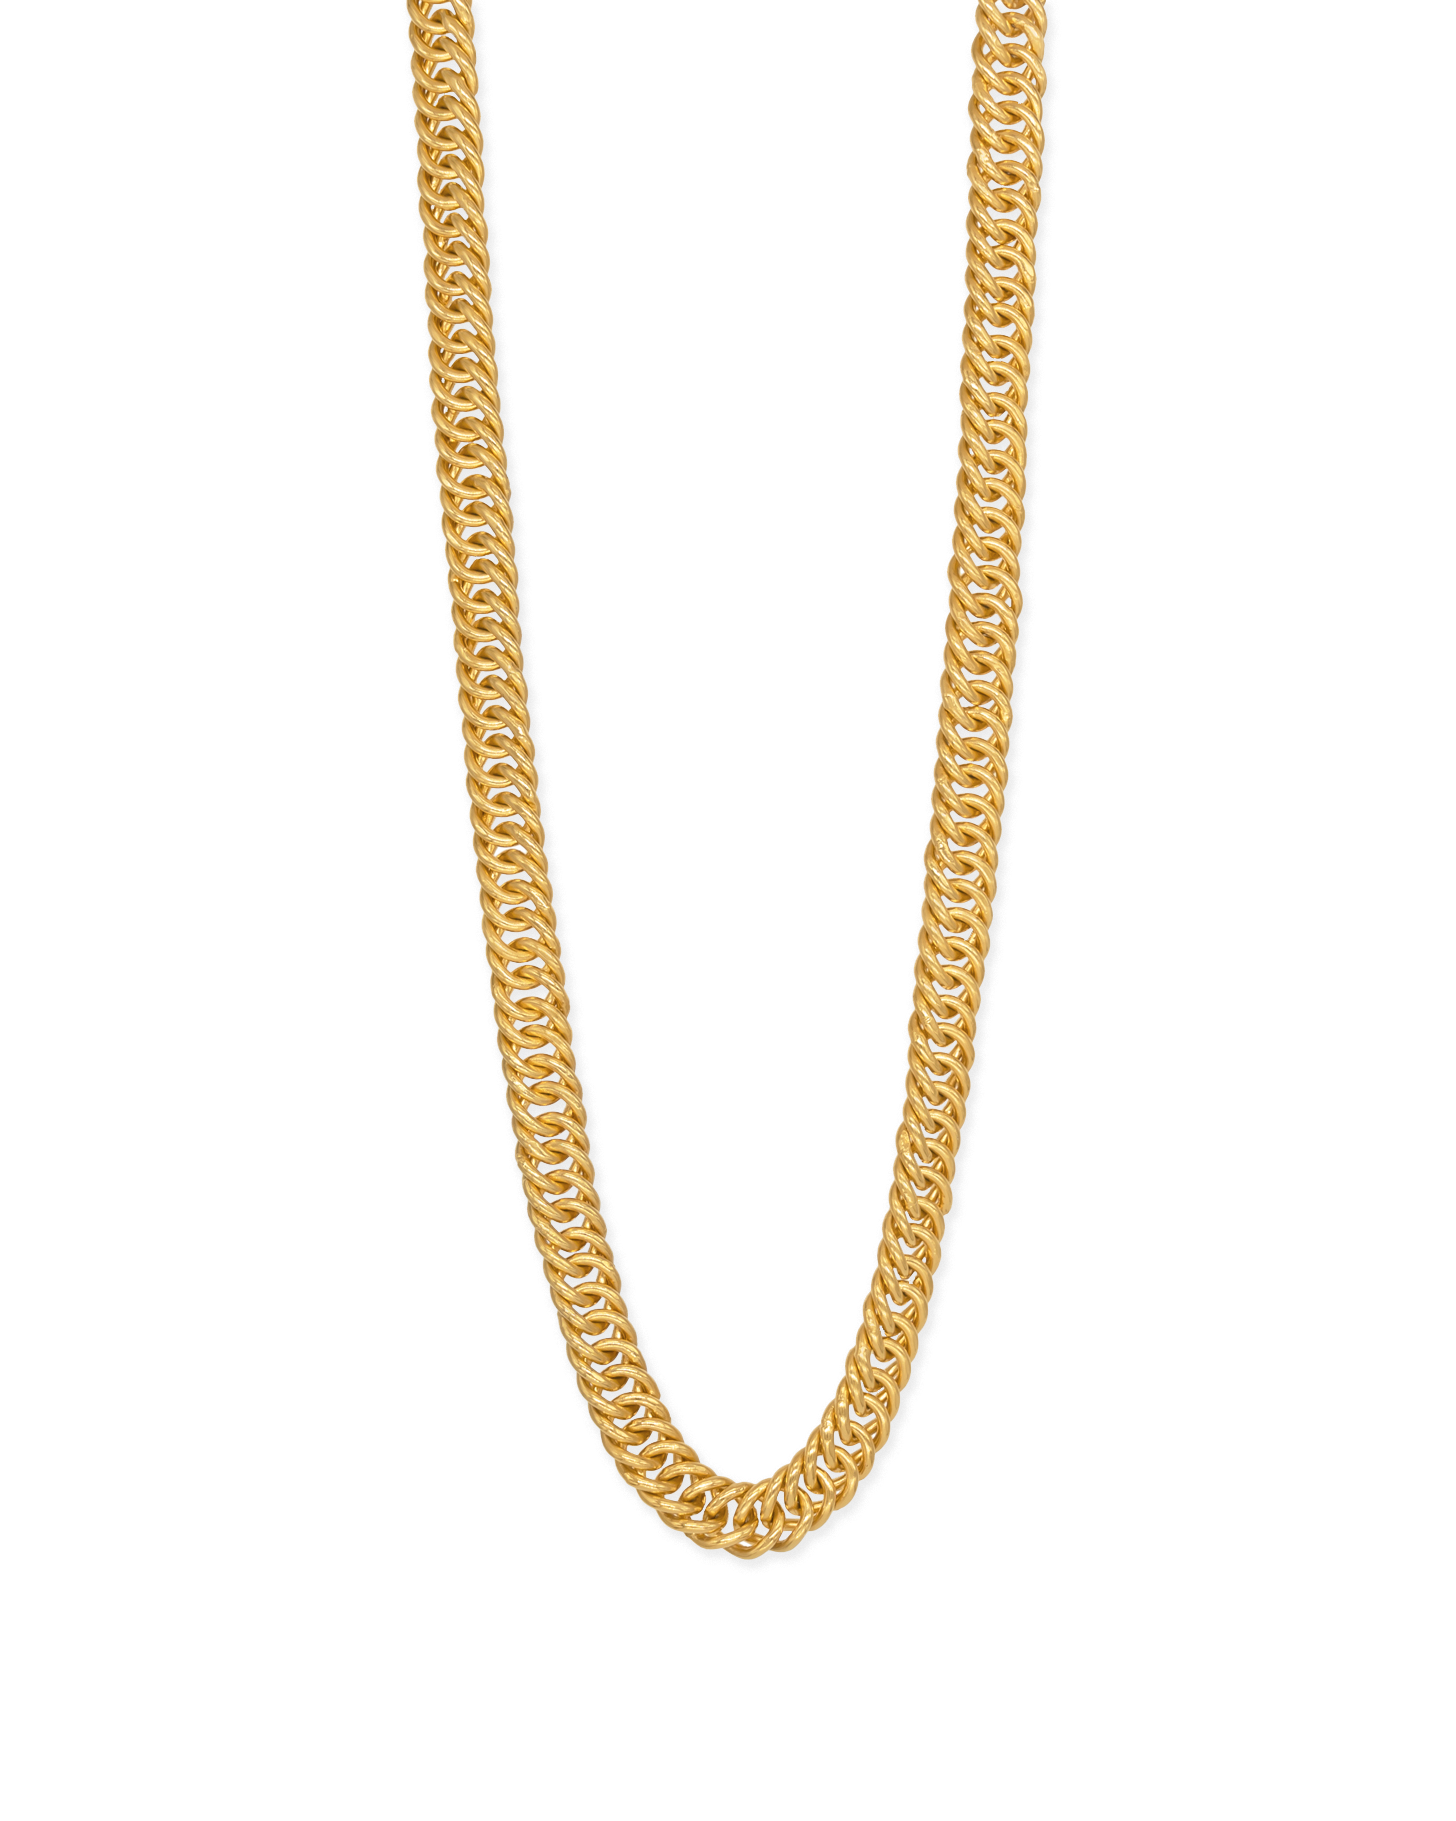 FOXTAIL CHAIN NECKLACE IN GOLD